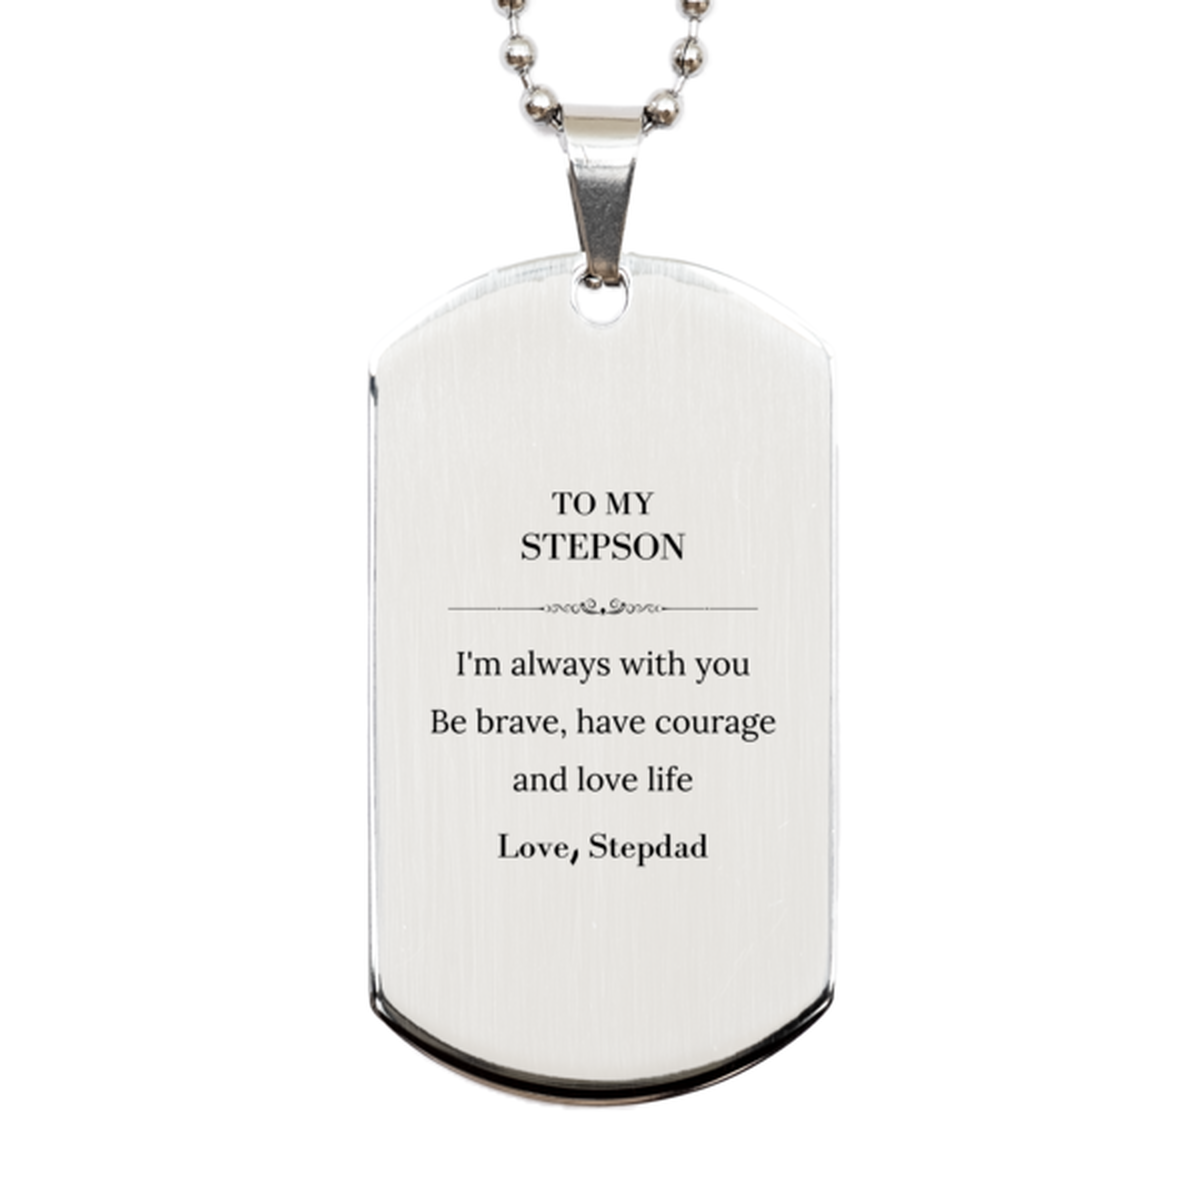 To My Stepson Gifts from Stepdad, Unique Silver Dog Tag Inspirational Christmas Birthday Graduation Gifts for Stepson I'm always with you. Be brave, have courage and love life. Love, Stepdad